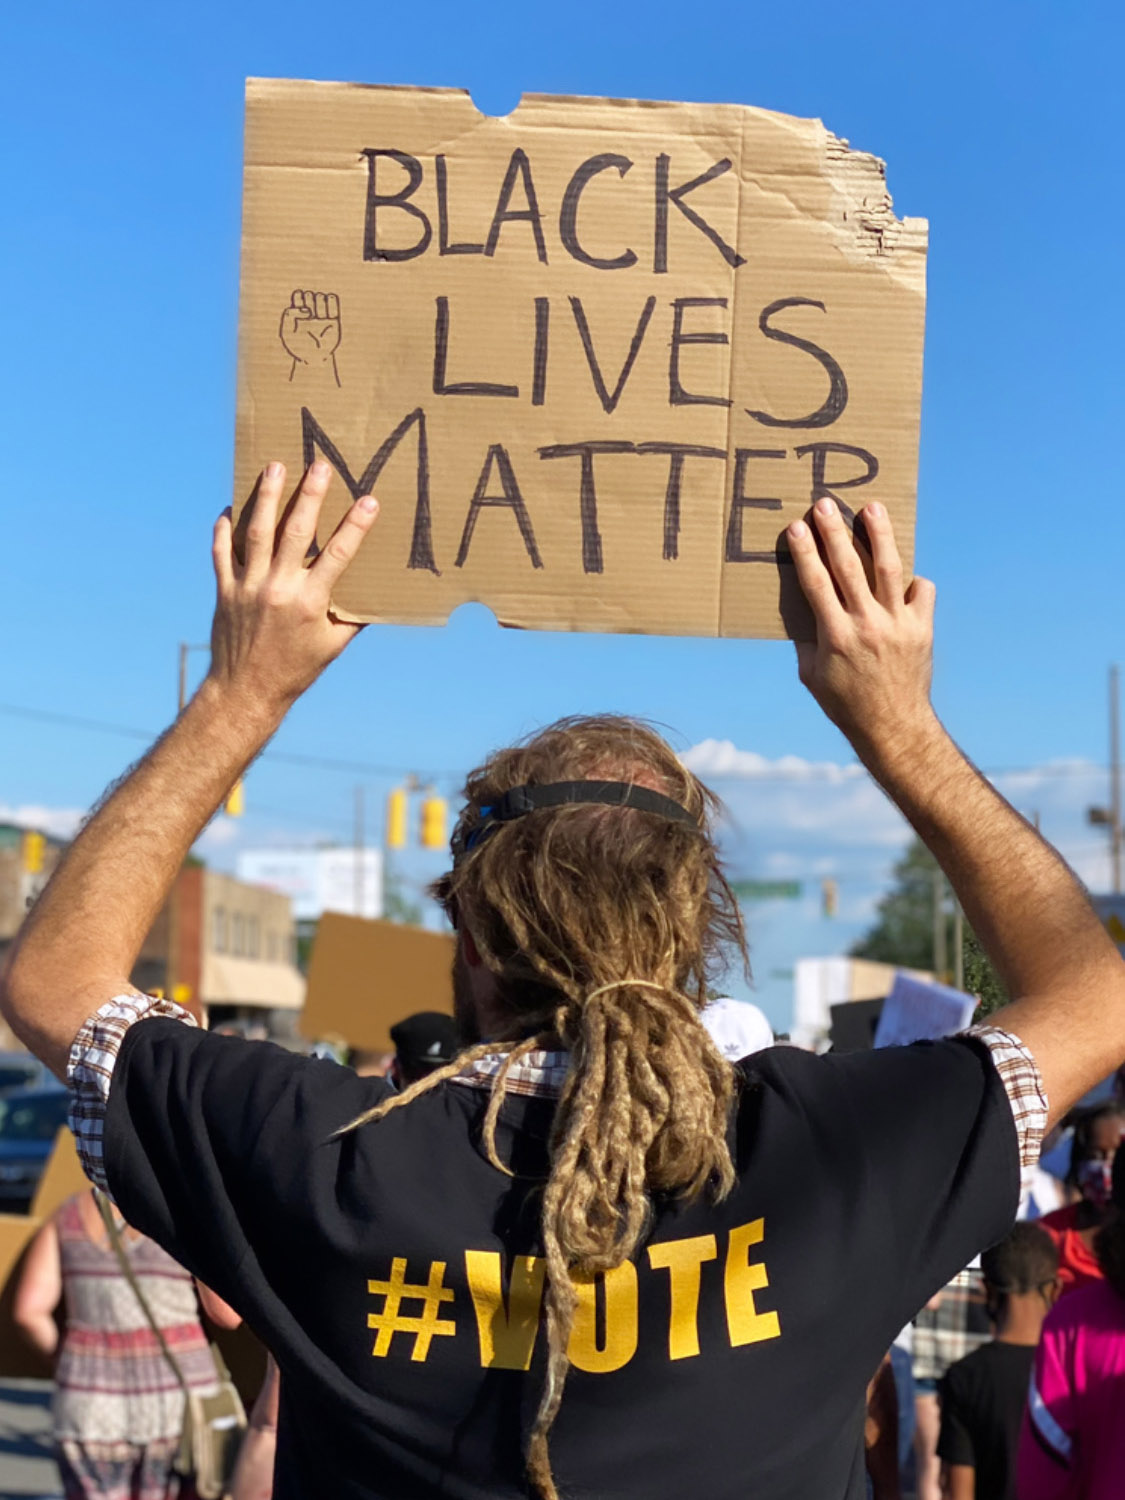 Black Lives Matter in Tullahoma, Tennessee